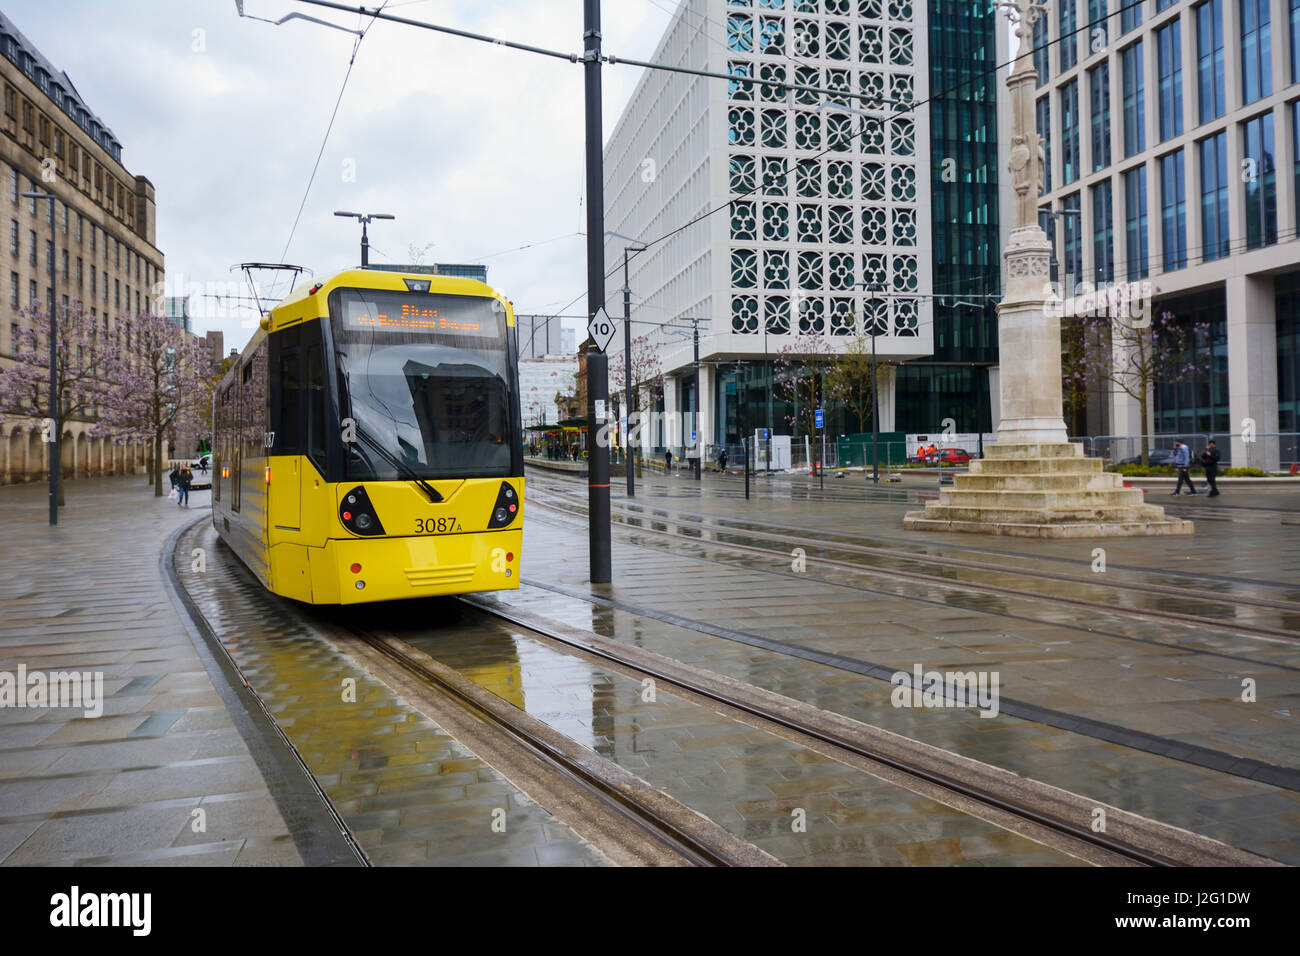 Metrolink light rail transport system entering St. Peters Square on a wet day in Manchester city centre. Stock Photo